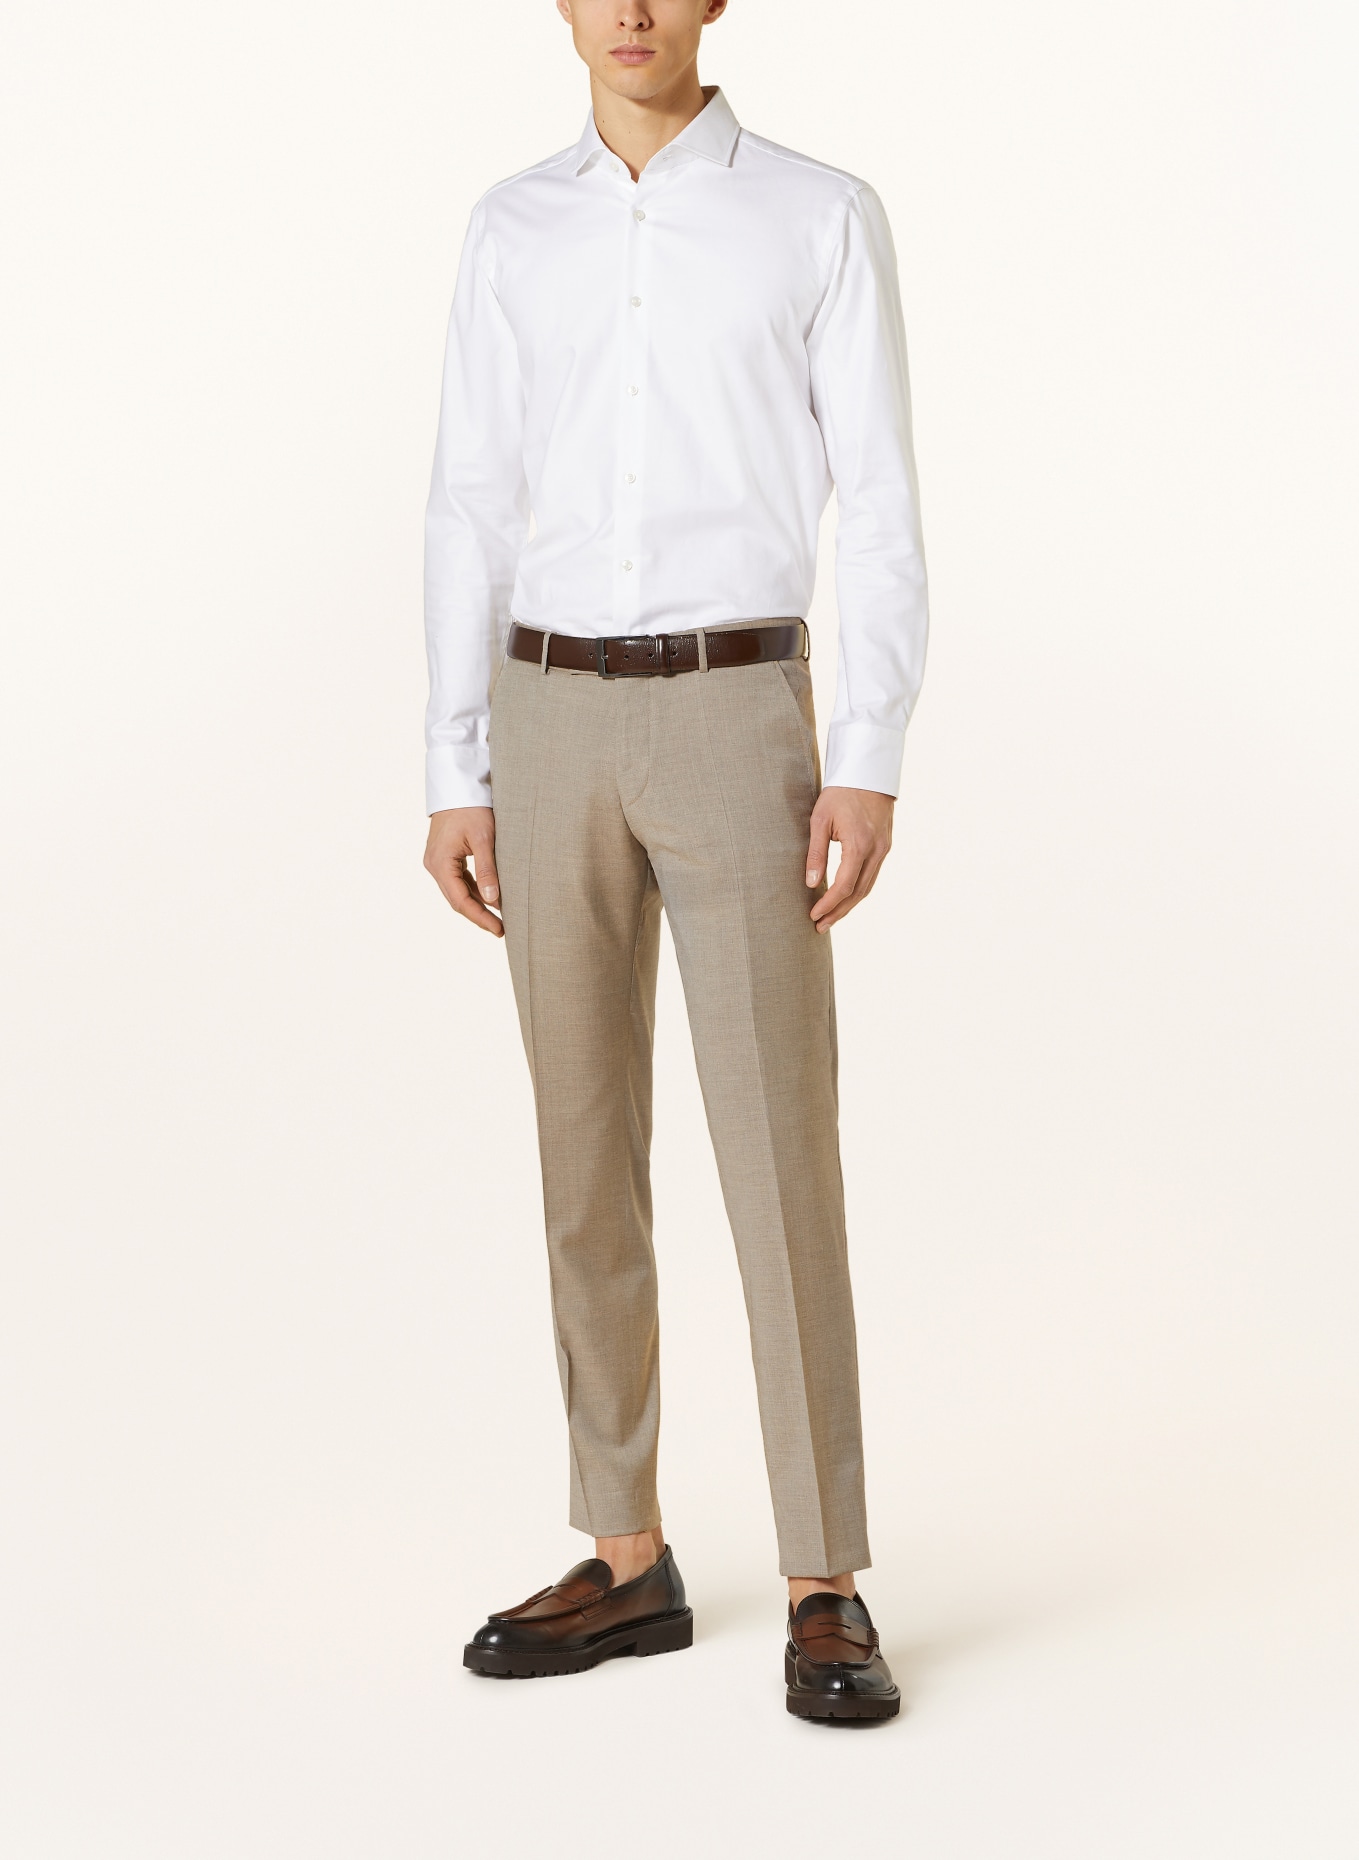 CG - CLUB of GENTS Suit trousers CG PACO slim fit, Color: 71 BRAUN HELL (Image 3)